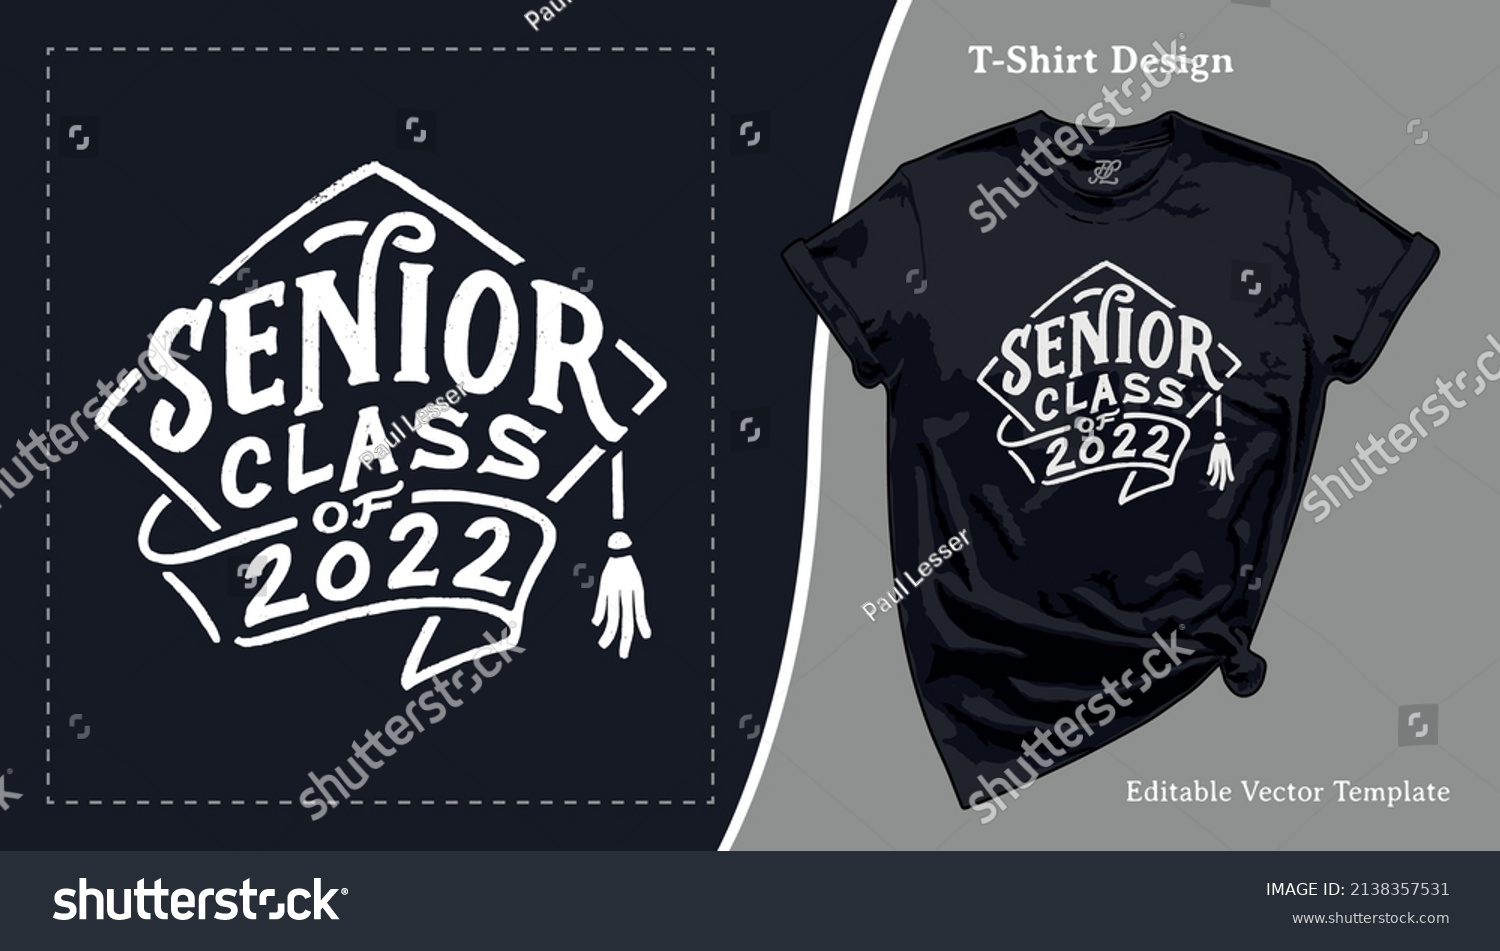 SVG of Senior Class of 2022, Graduation T-Shirt Design. Grad School Senior Night T shirt Template with a Hand-lettering for Print on Demand Tee, Apparel, Clothing, SVG and Screen Print svg